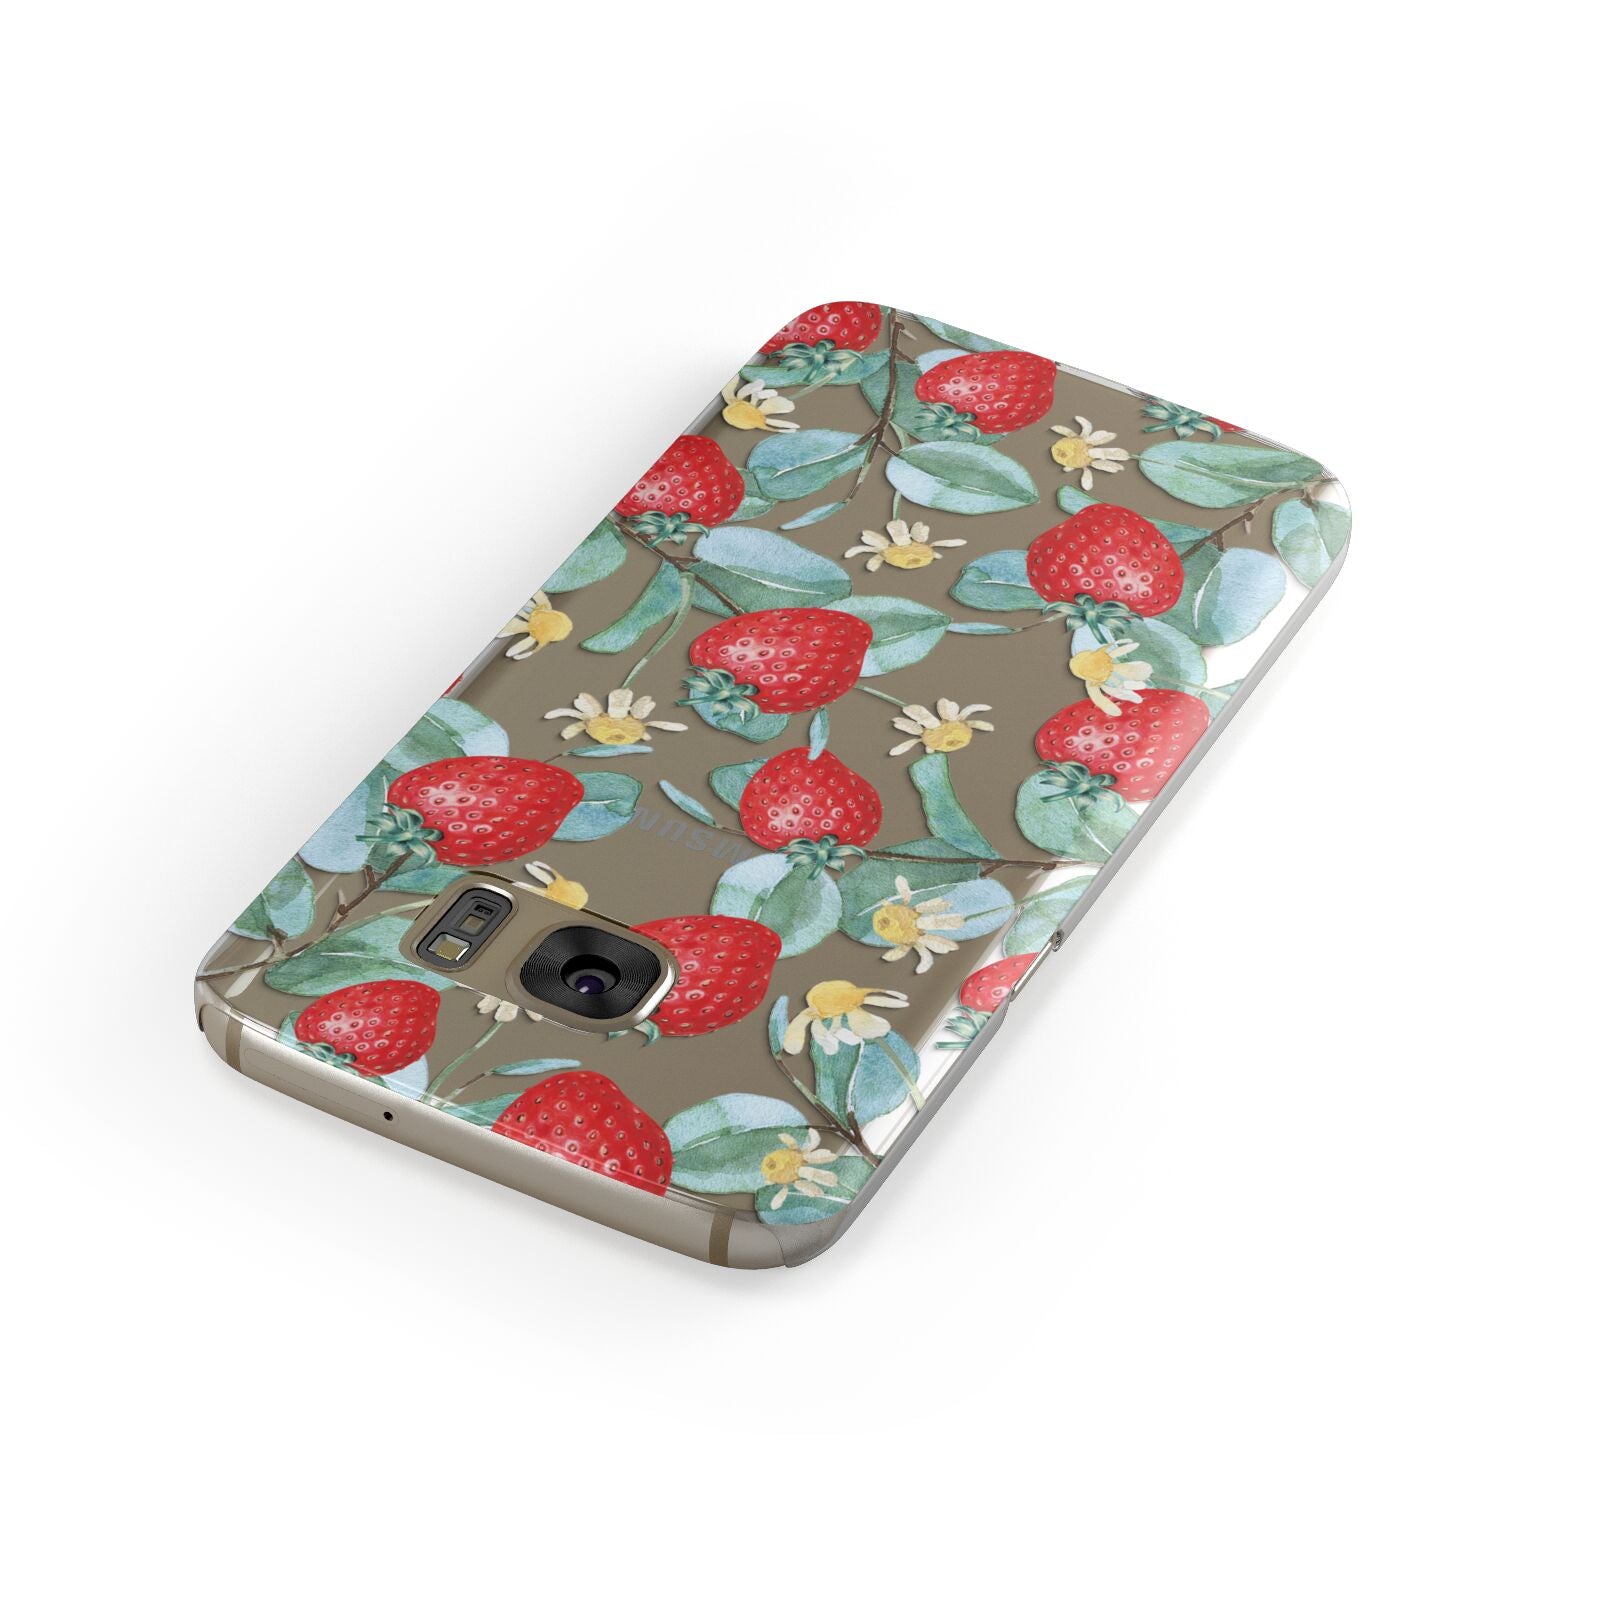 Strawberry Plant Samsung Galaxy Case Front Close Up